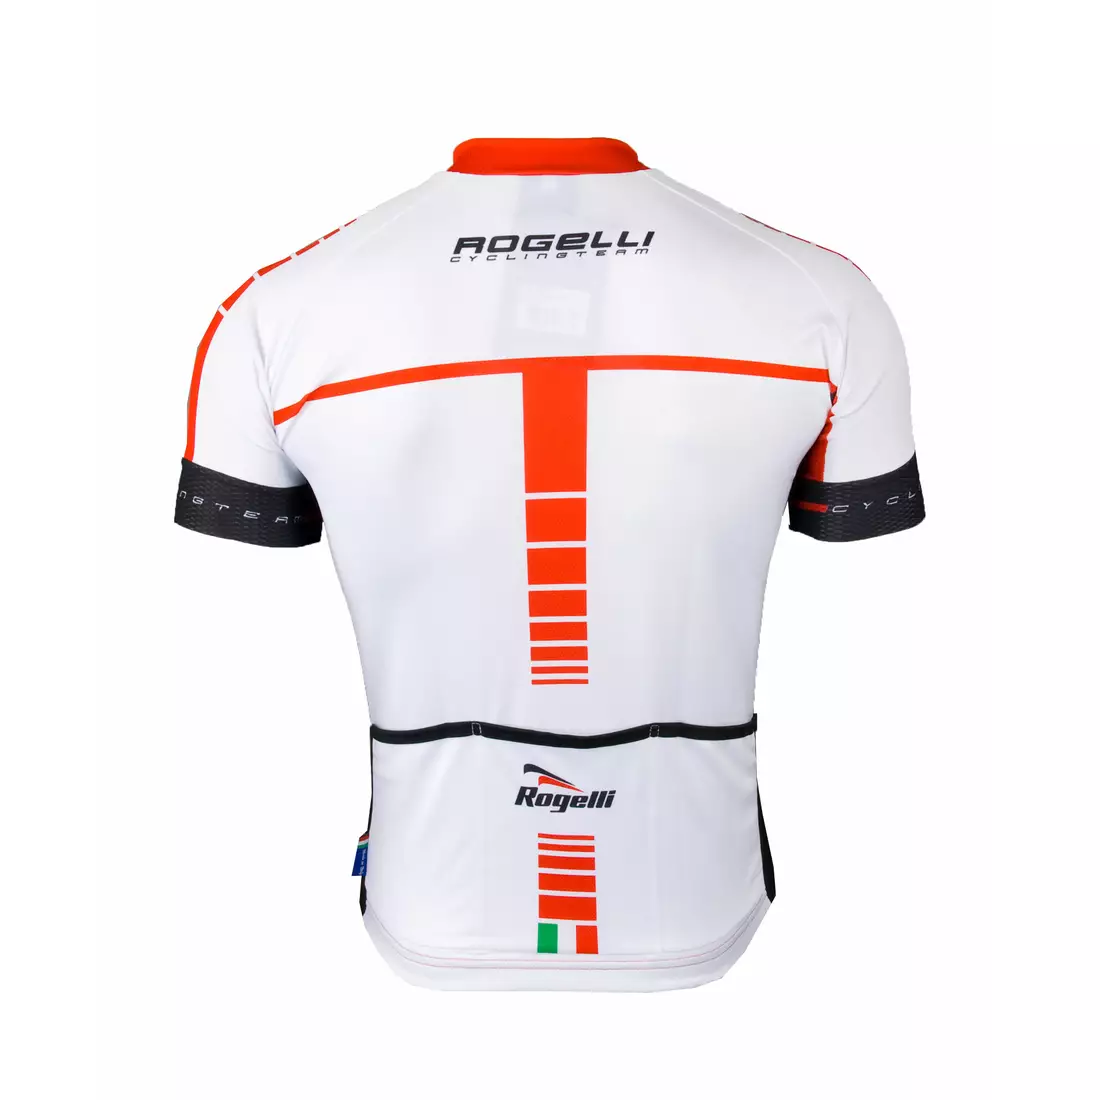 ROGELLI UMBRIA men's cycling jersey, 001.233, White